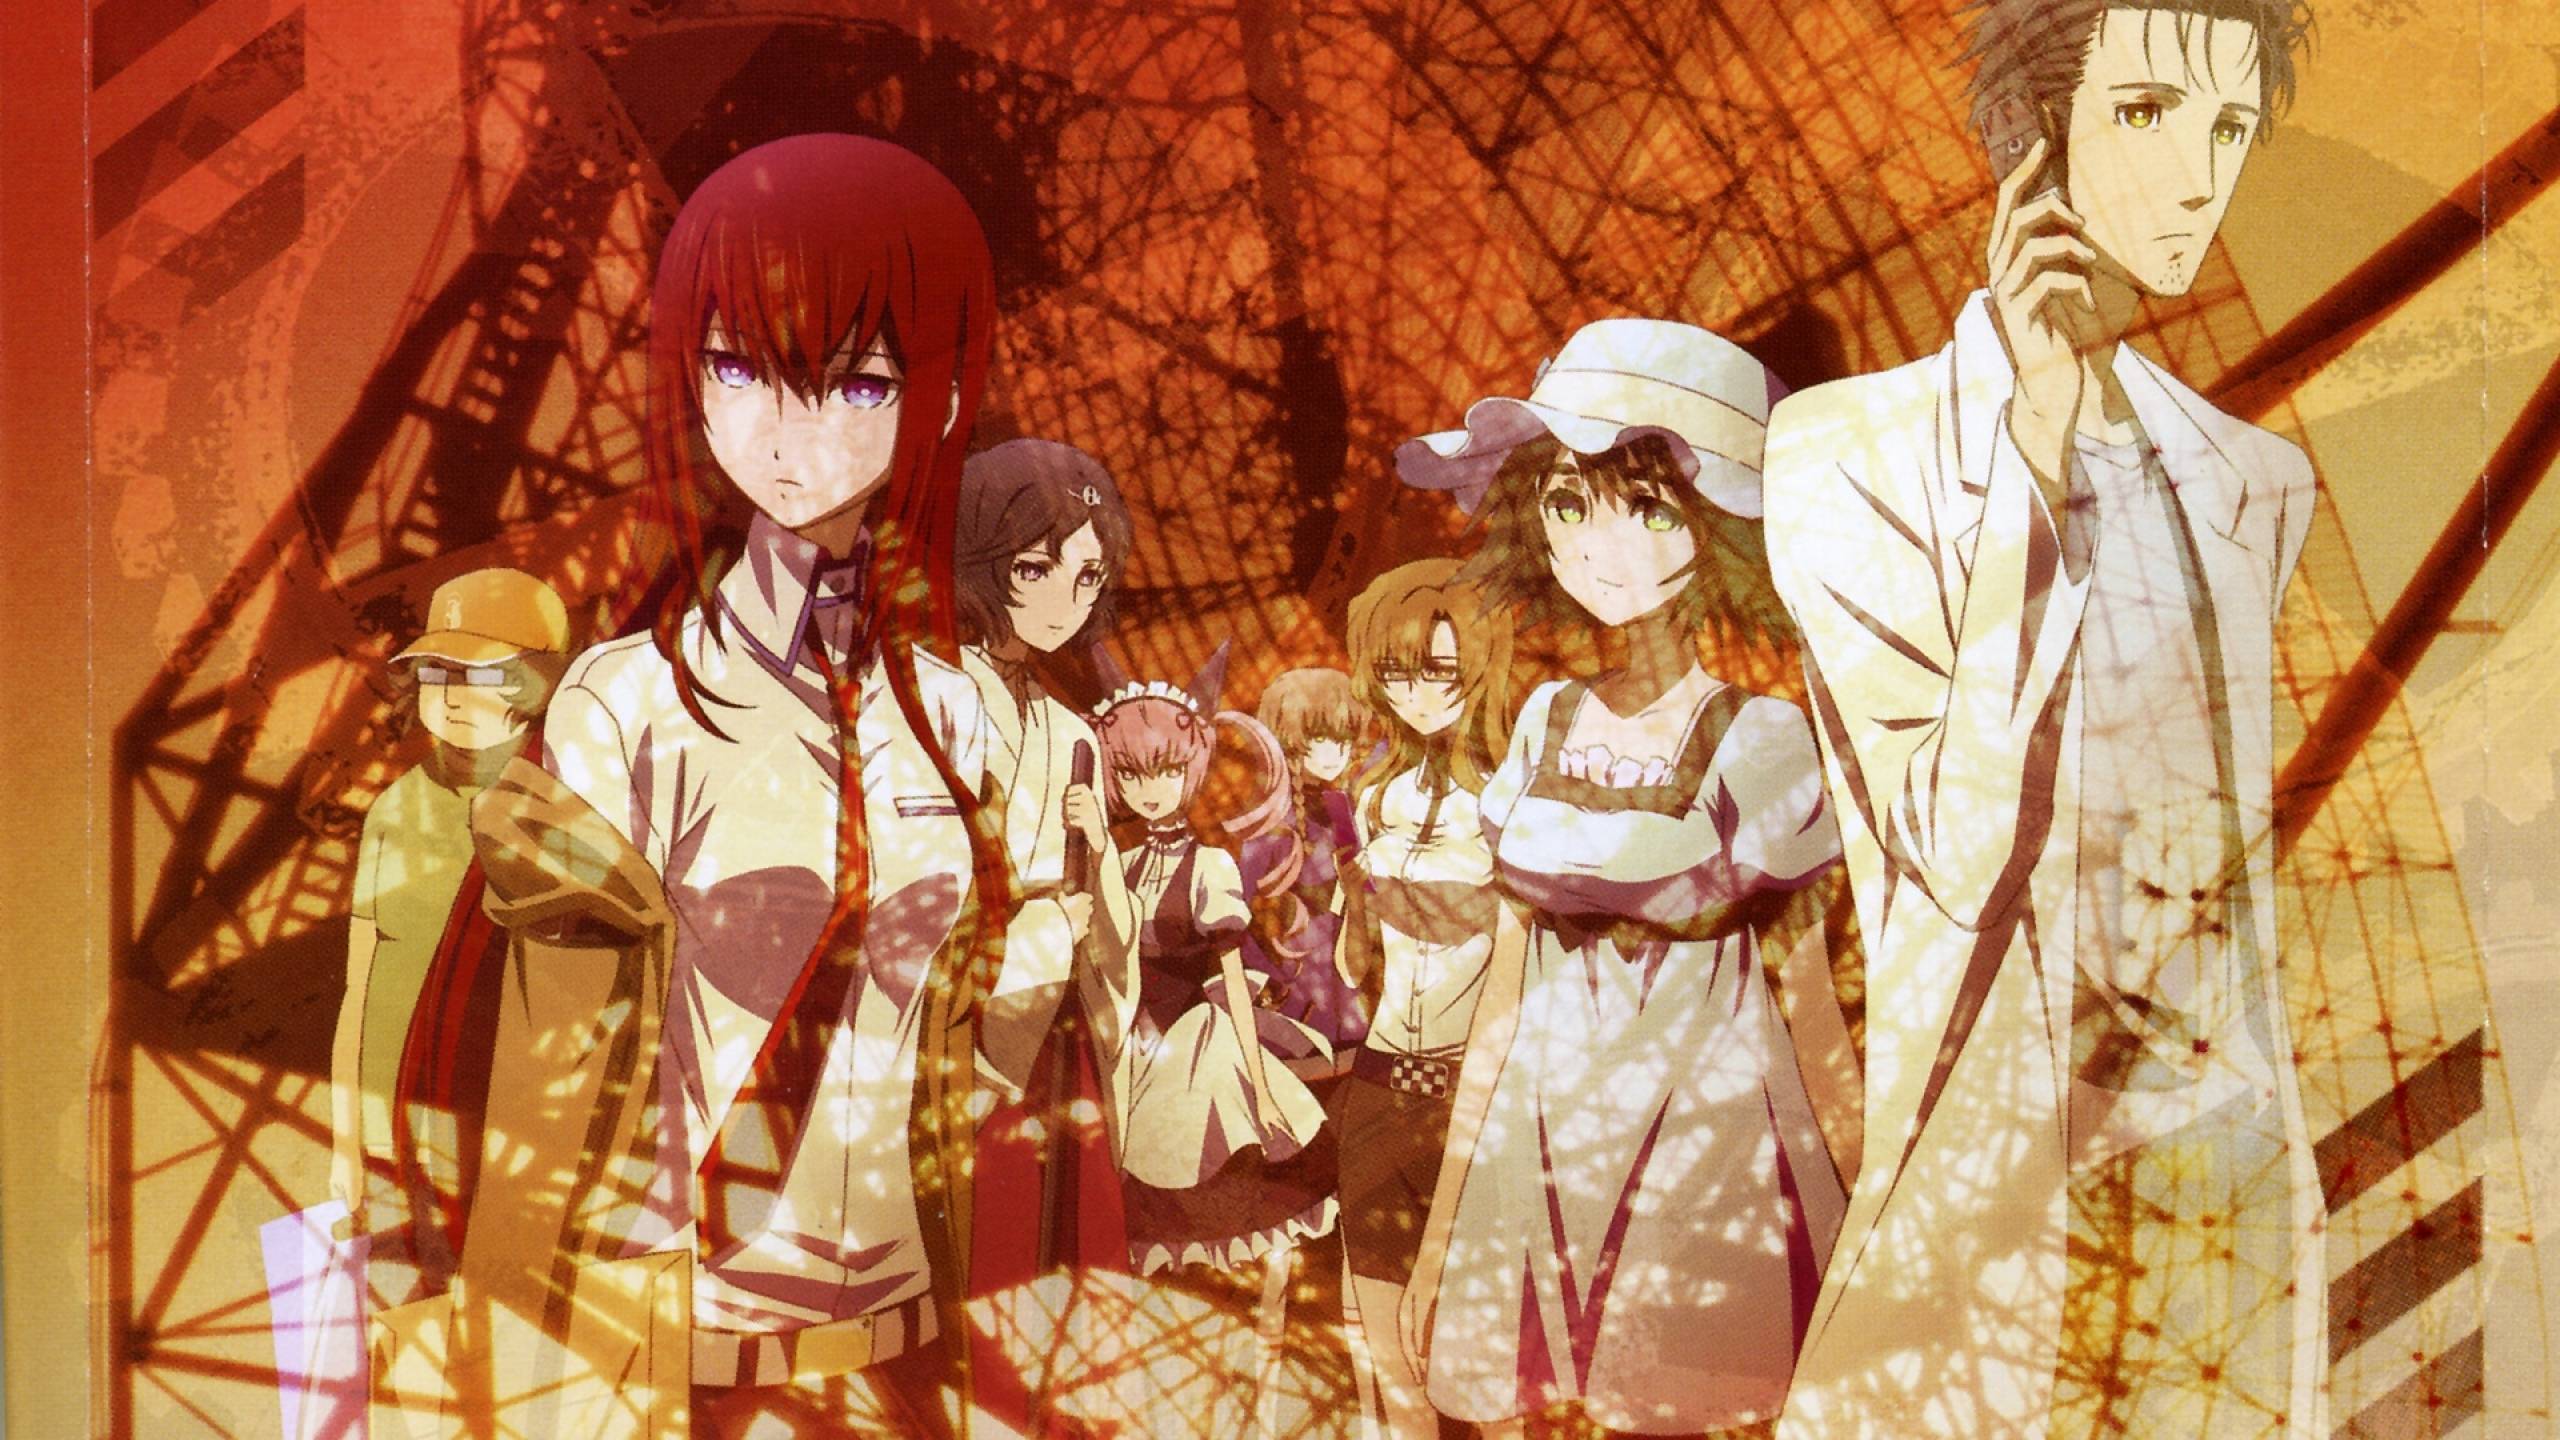 Steins;Gate Wallpapers - Wallpaper Cave